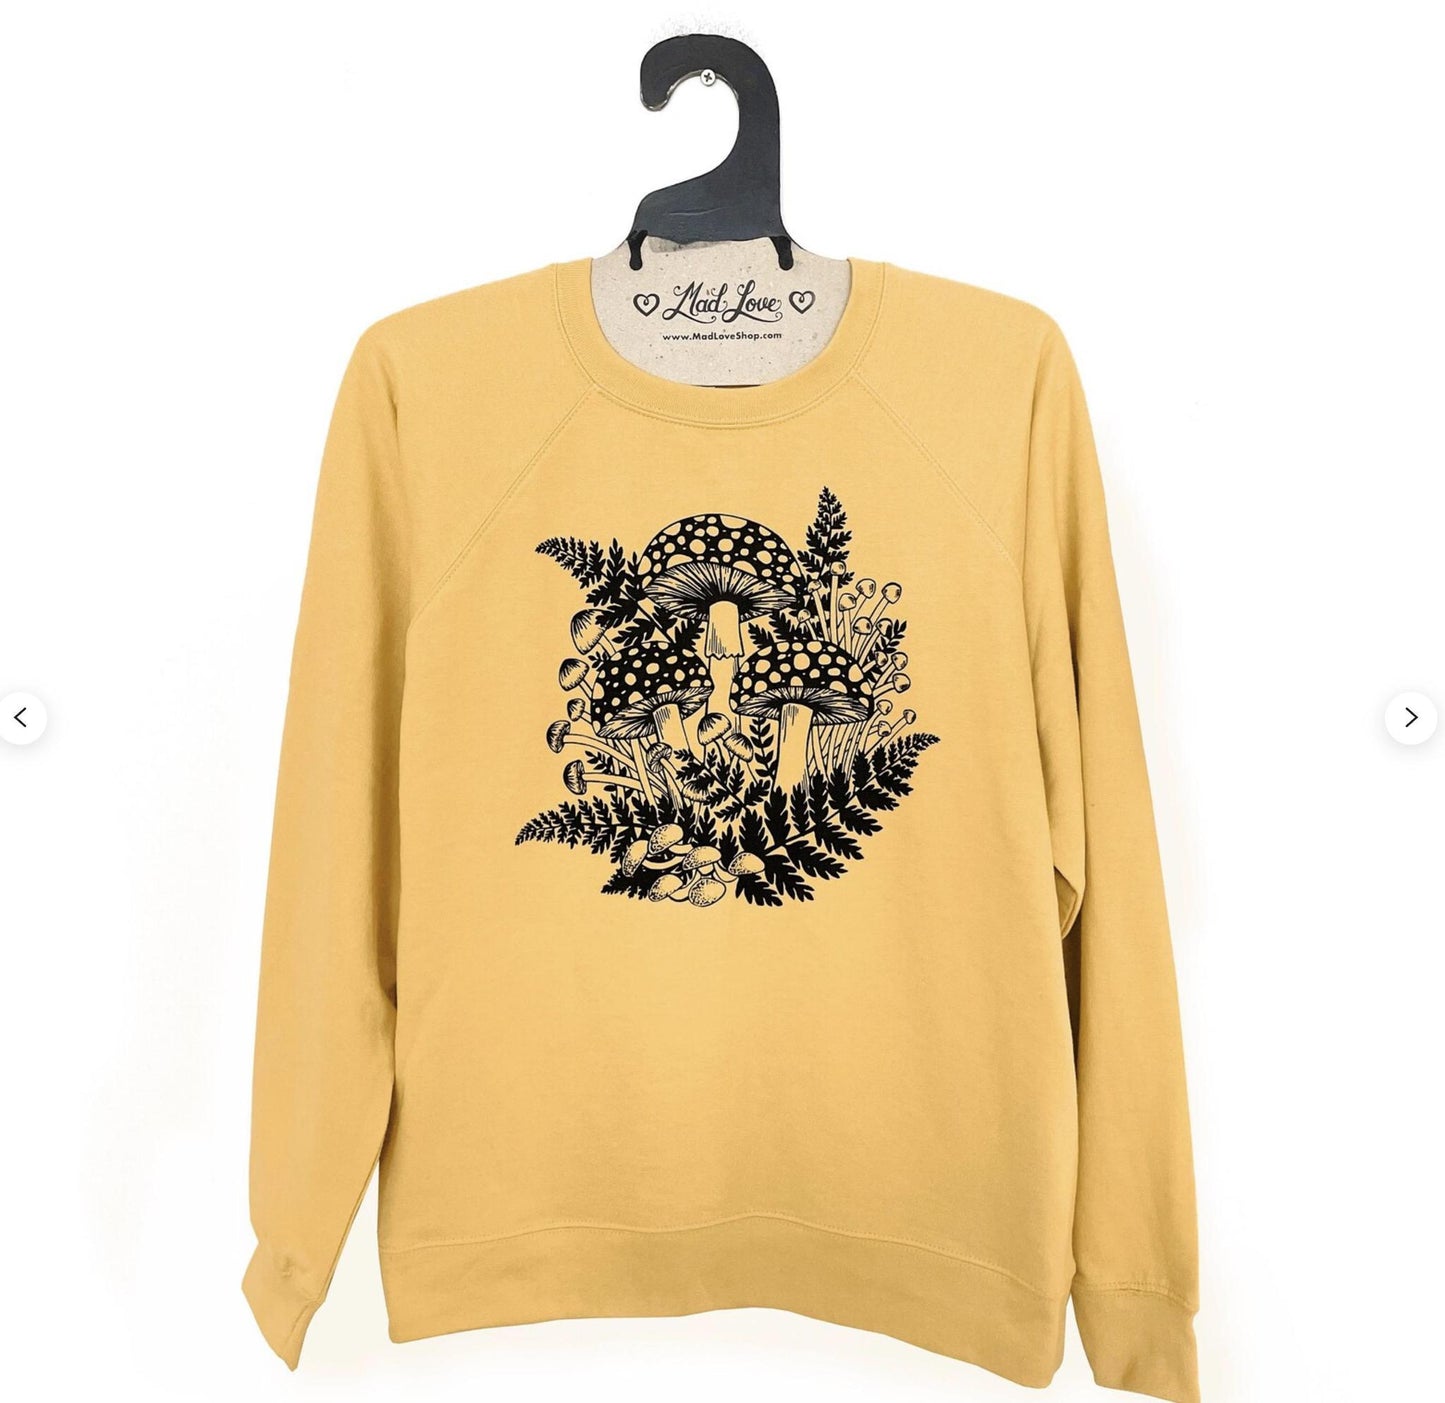 Mad Love Unisex Light Mustard Gold French Terry Sweatshirt with Mushrooms and Ferns - Small